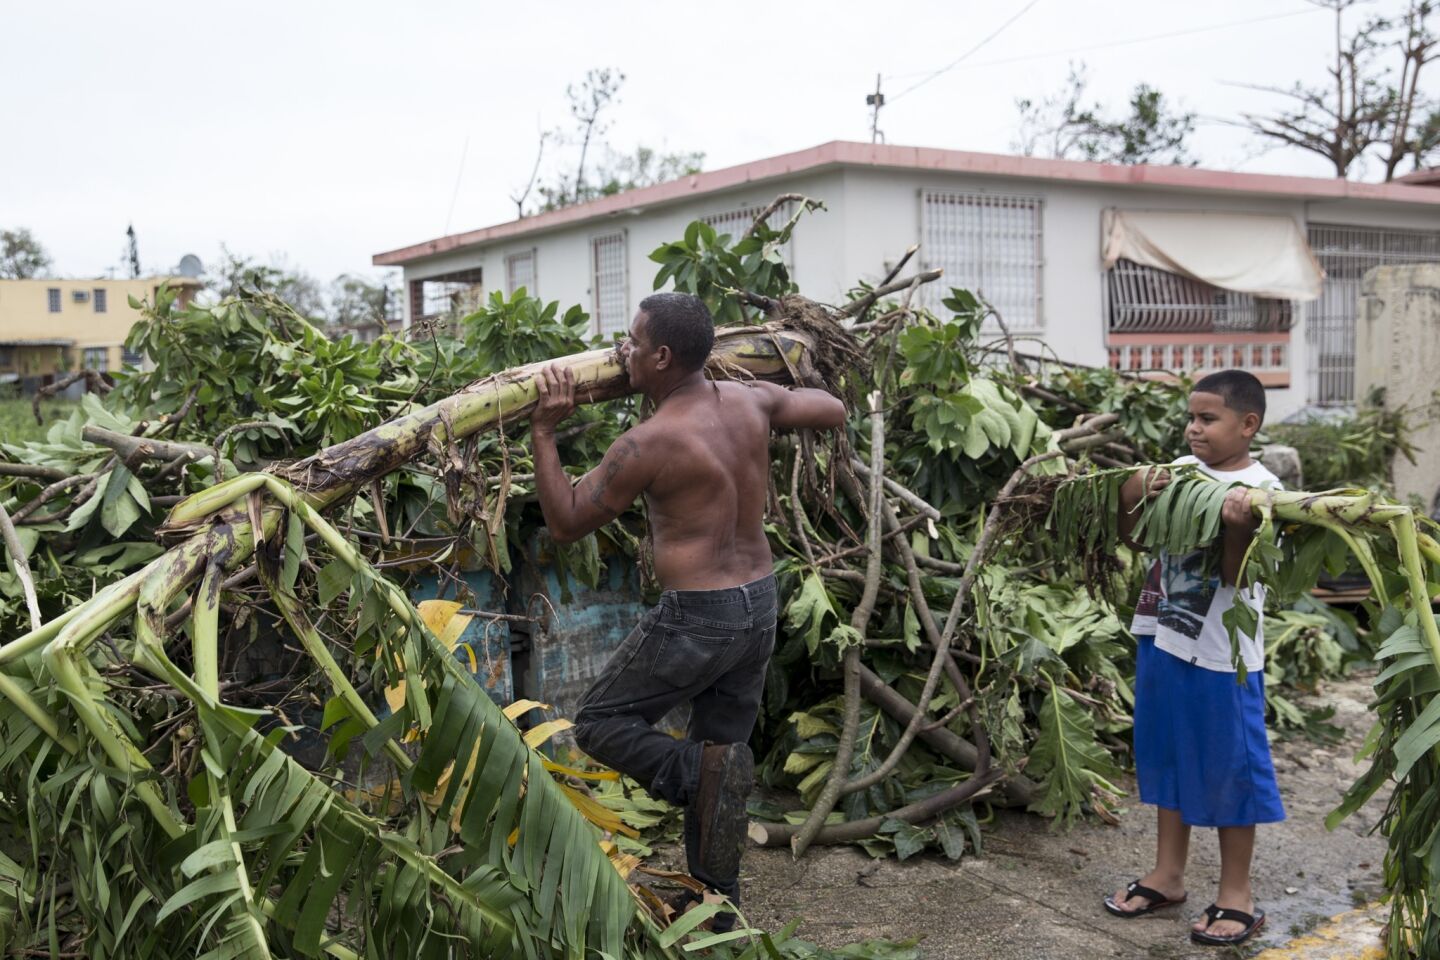 Residents clear the streets after Hurricane Maria made landfall in the Guaynabo suburb of San Juan, Puerto Rico.